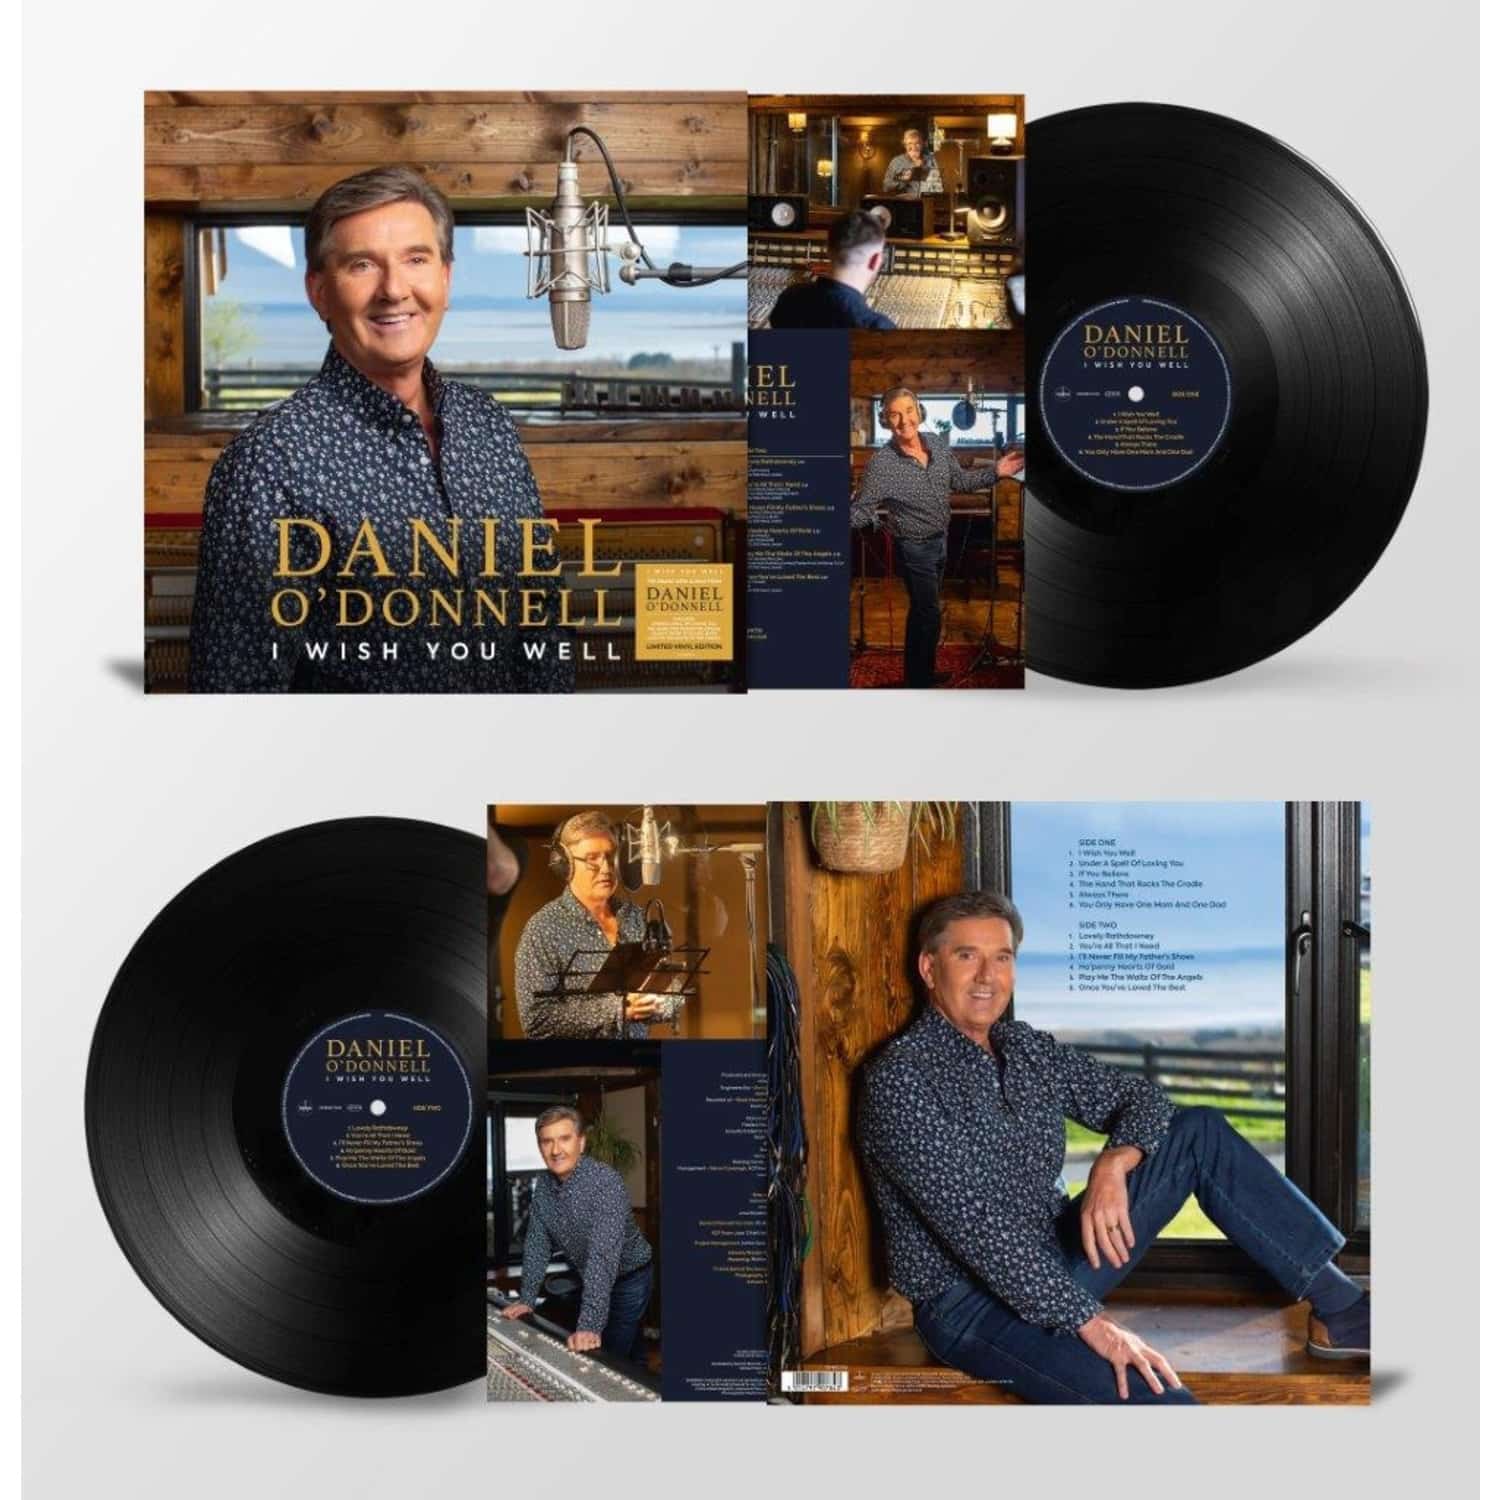 Daniel O Donnell - I WISH YOU WELL 